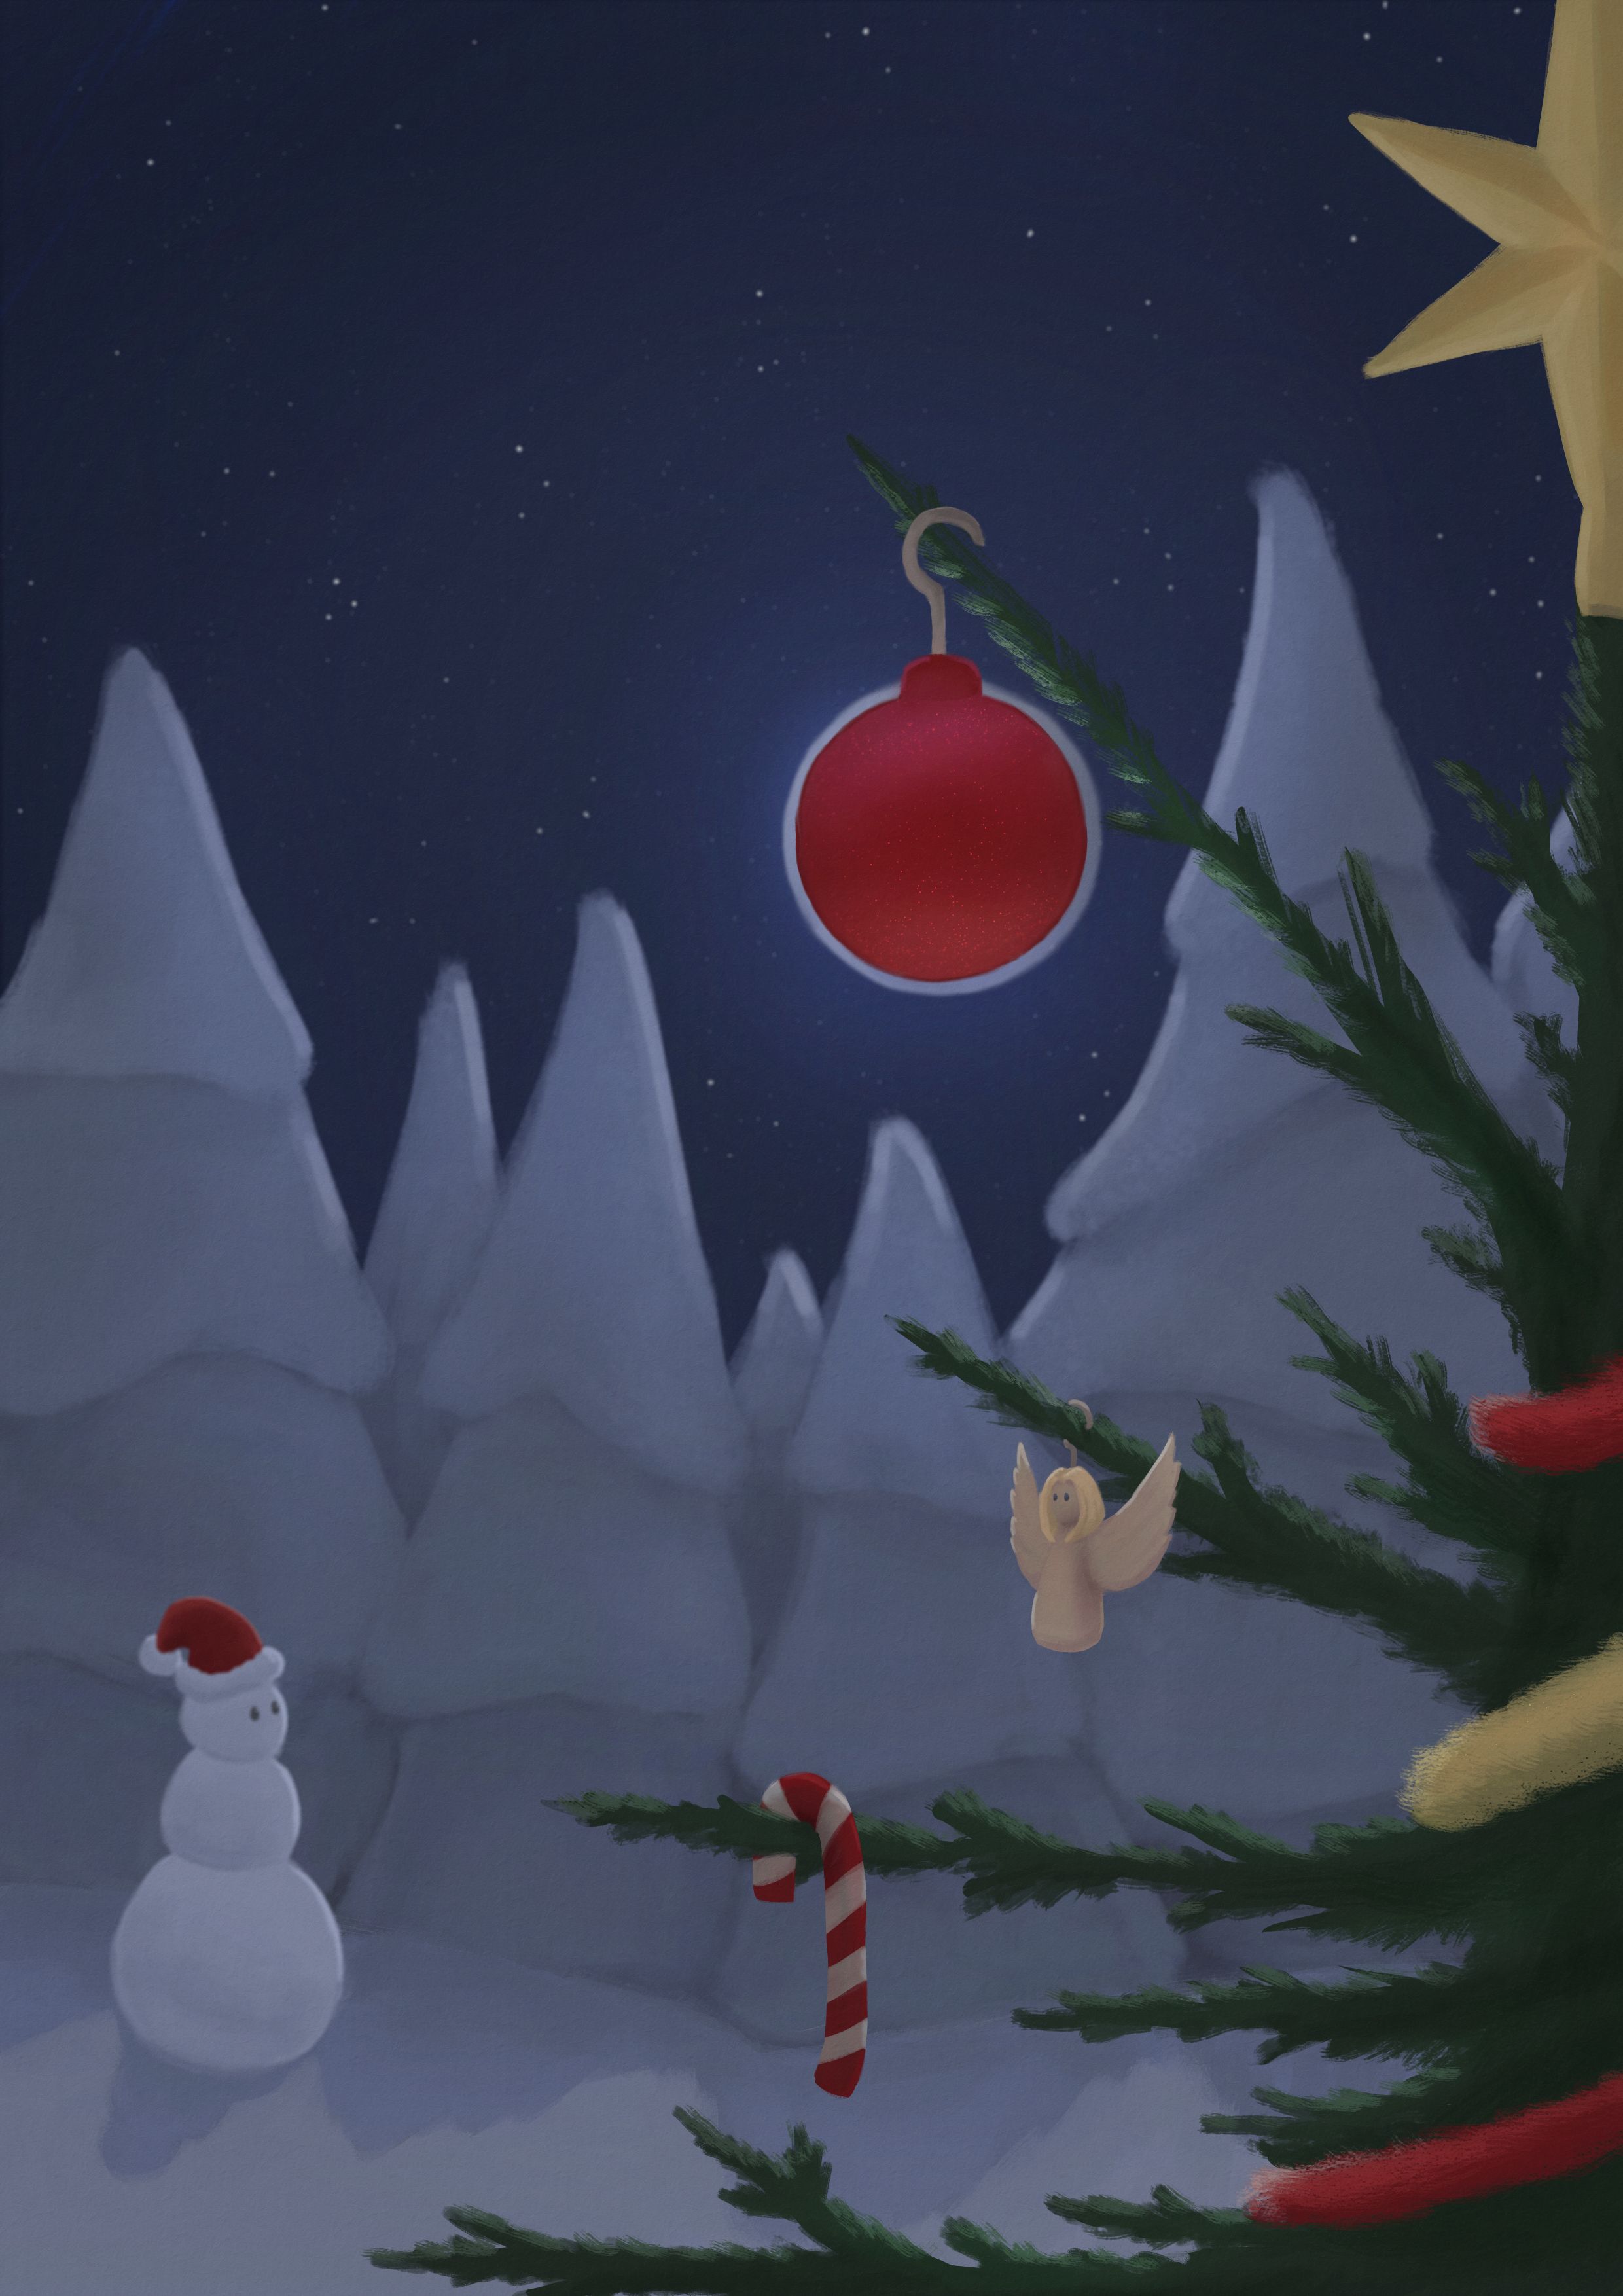 Digital painting of a nightly forest scene with a christmas
tree in the foreground. A spherical ornament on the tree hides the full moon
behind it.